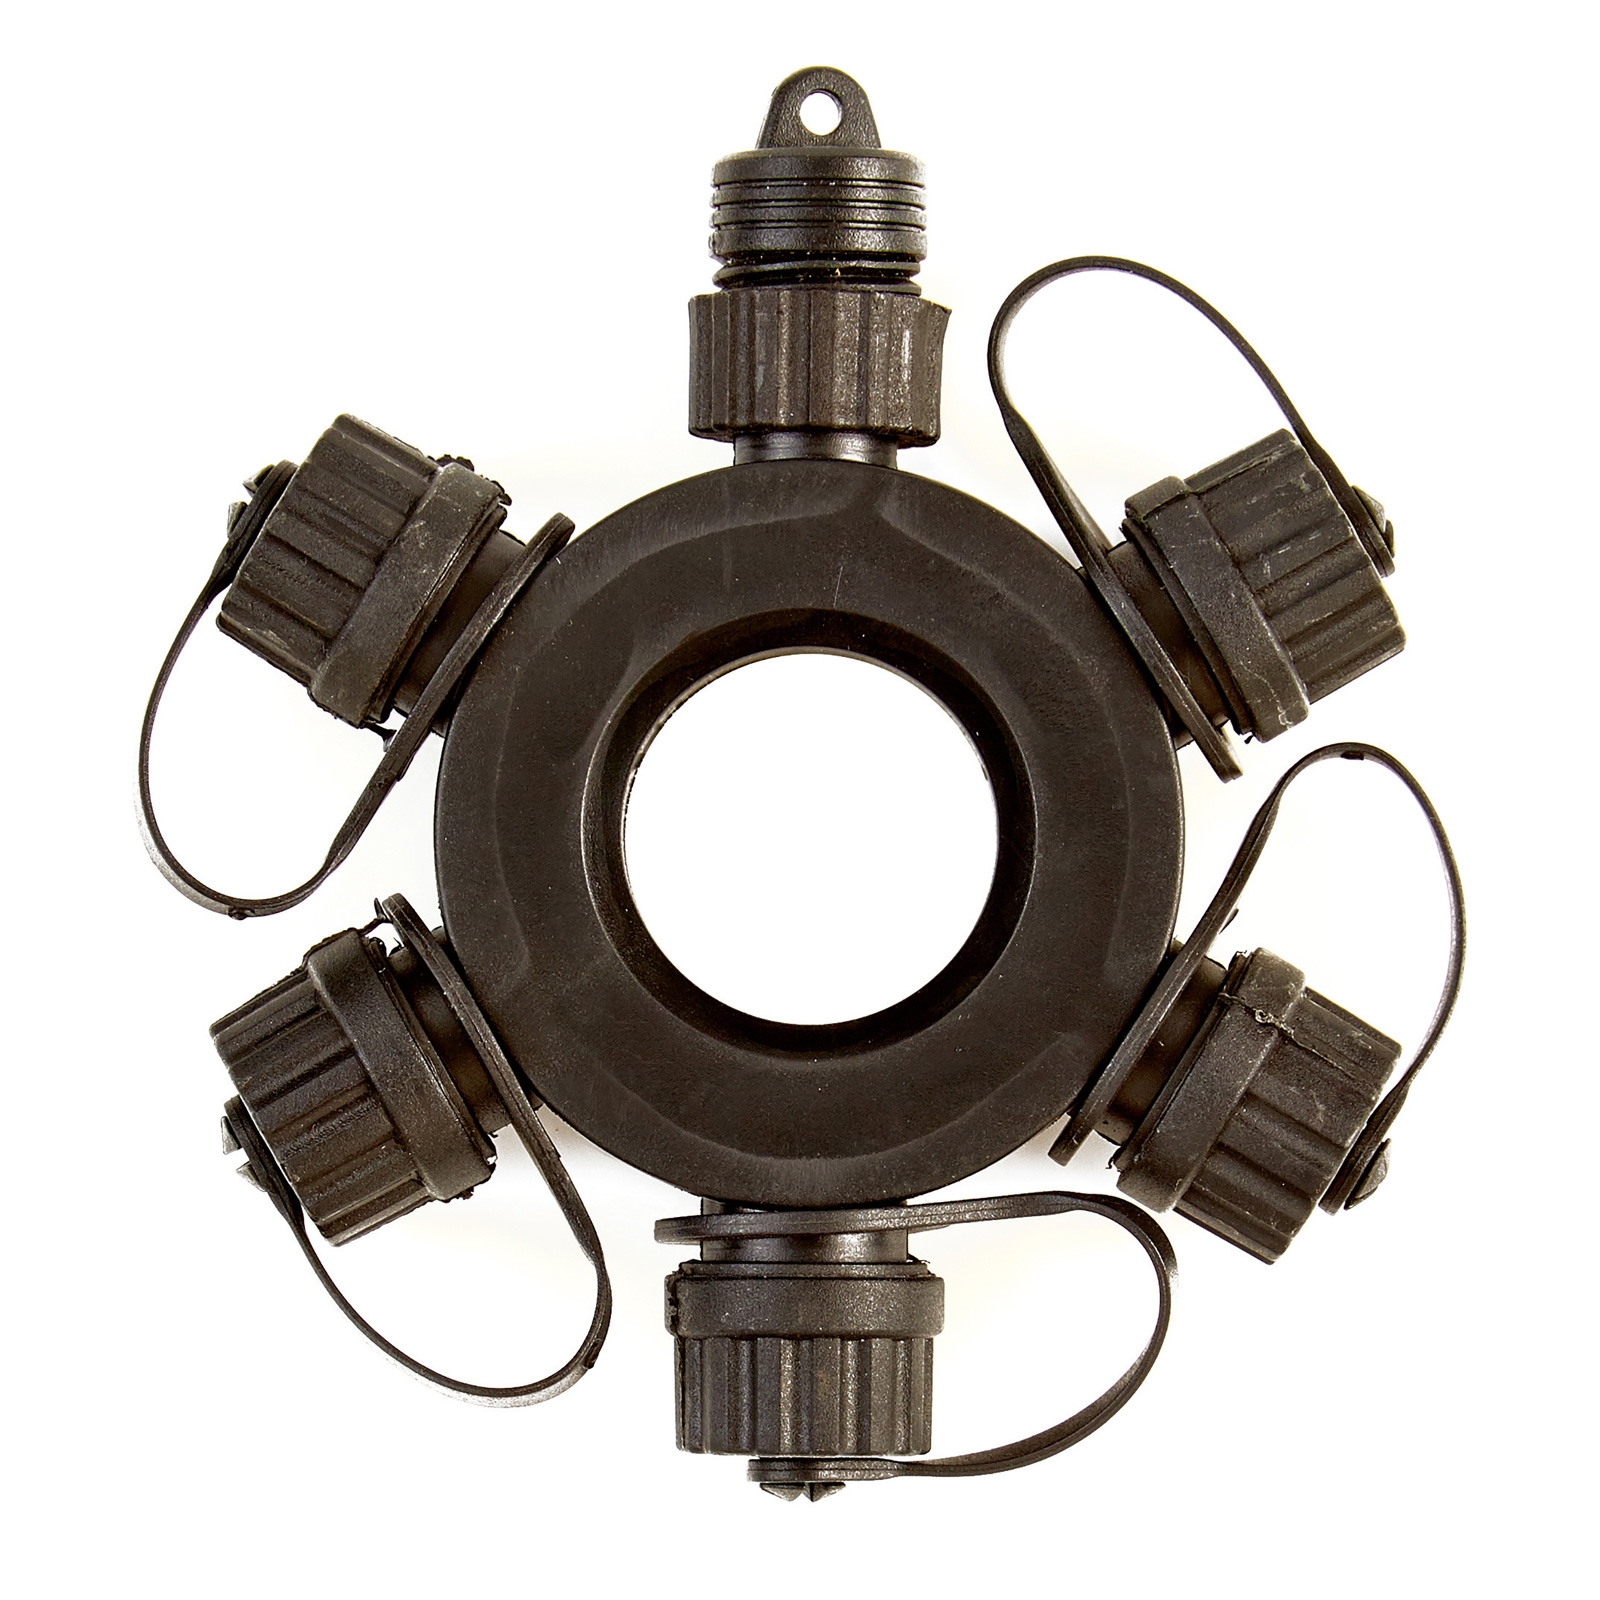 5 Multi Way Connector For Premier Lights